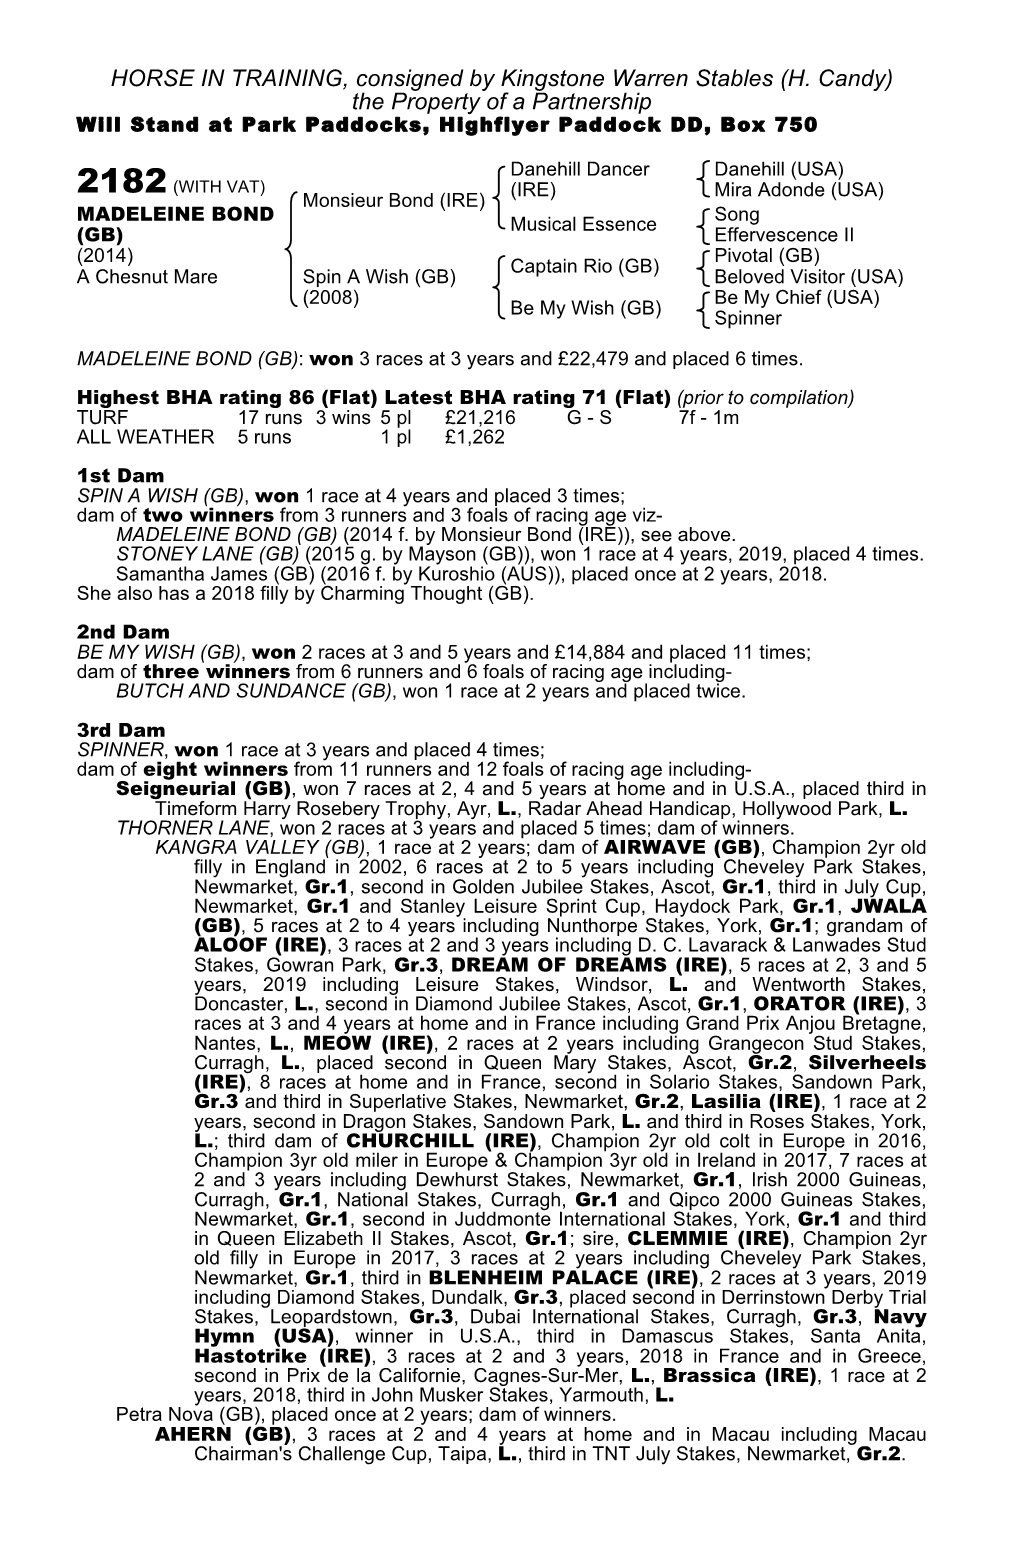 HORSE in TRAINING, Consigned by Kingstone Warren Stables (H